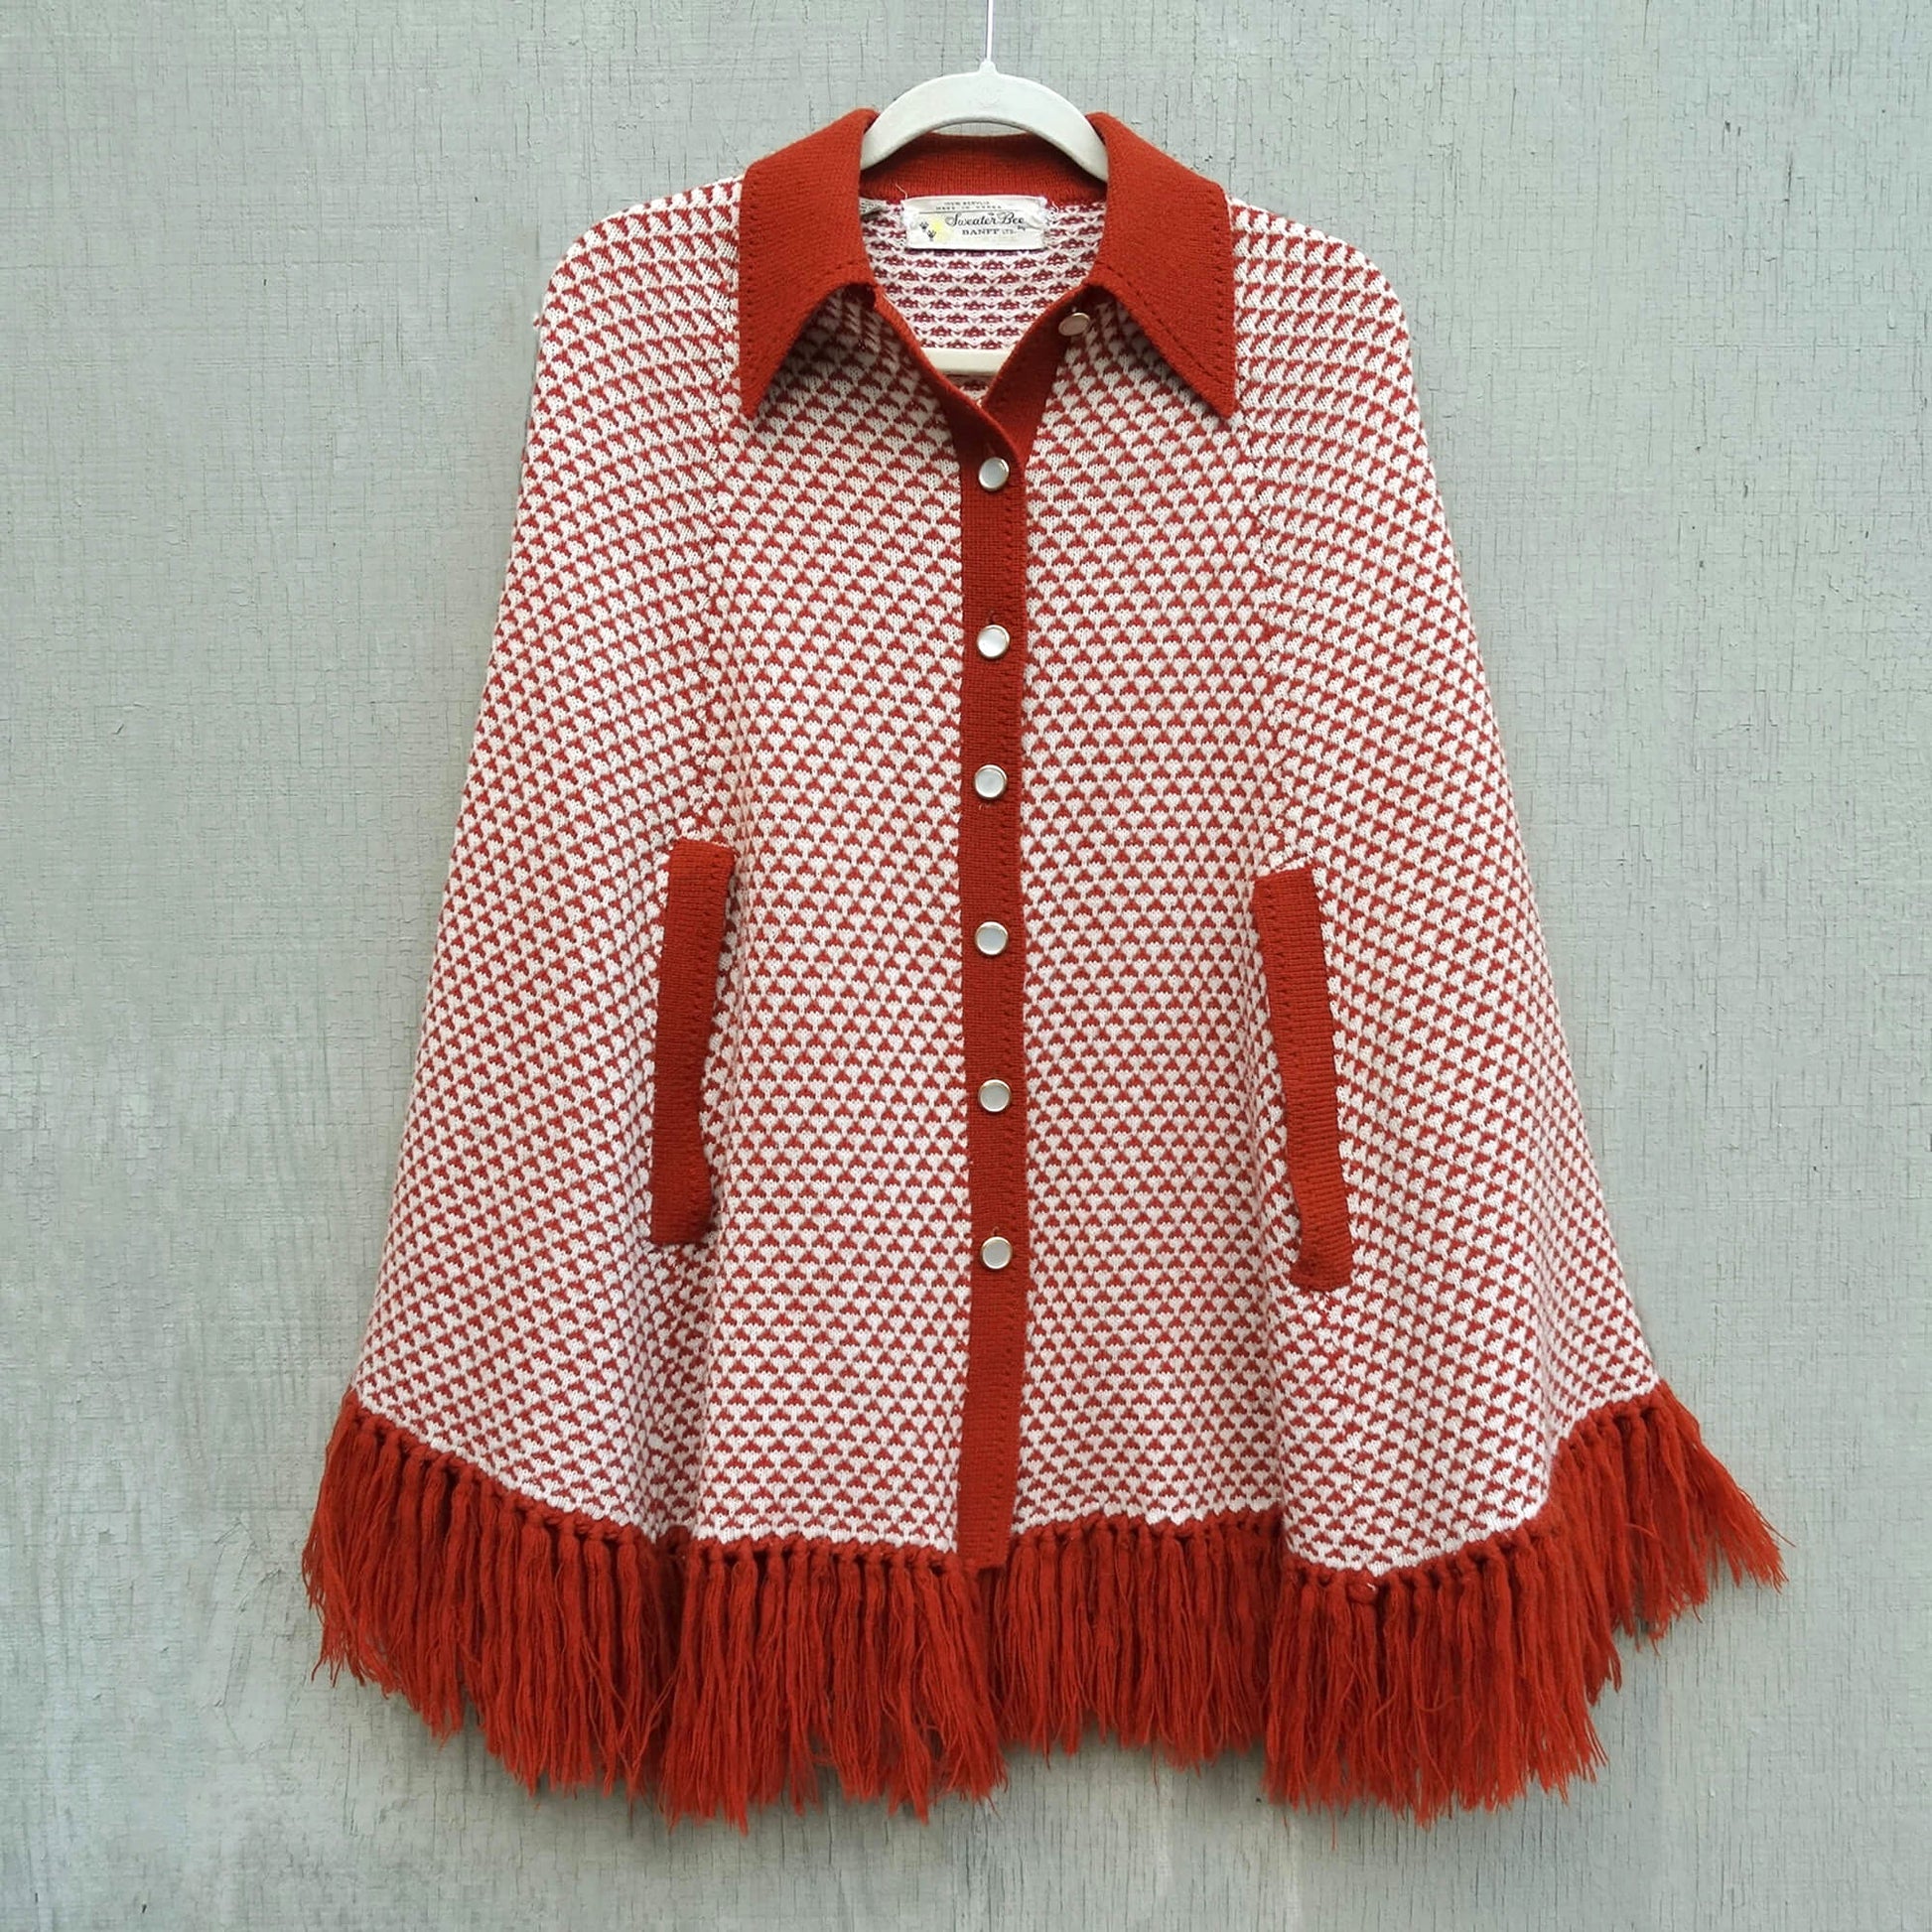 Sweater-Bee-Cape by-Banff.-Orange-and-White-Patterned.-Mother-of-Pearl-Buttons.-Fringed.-Shop-eBargainsAndDeals.com.